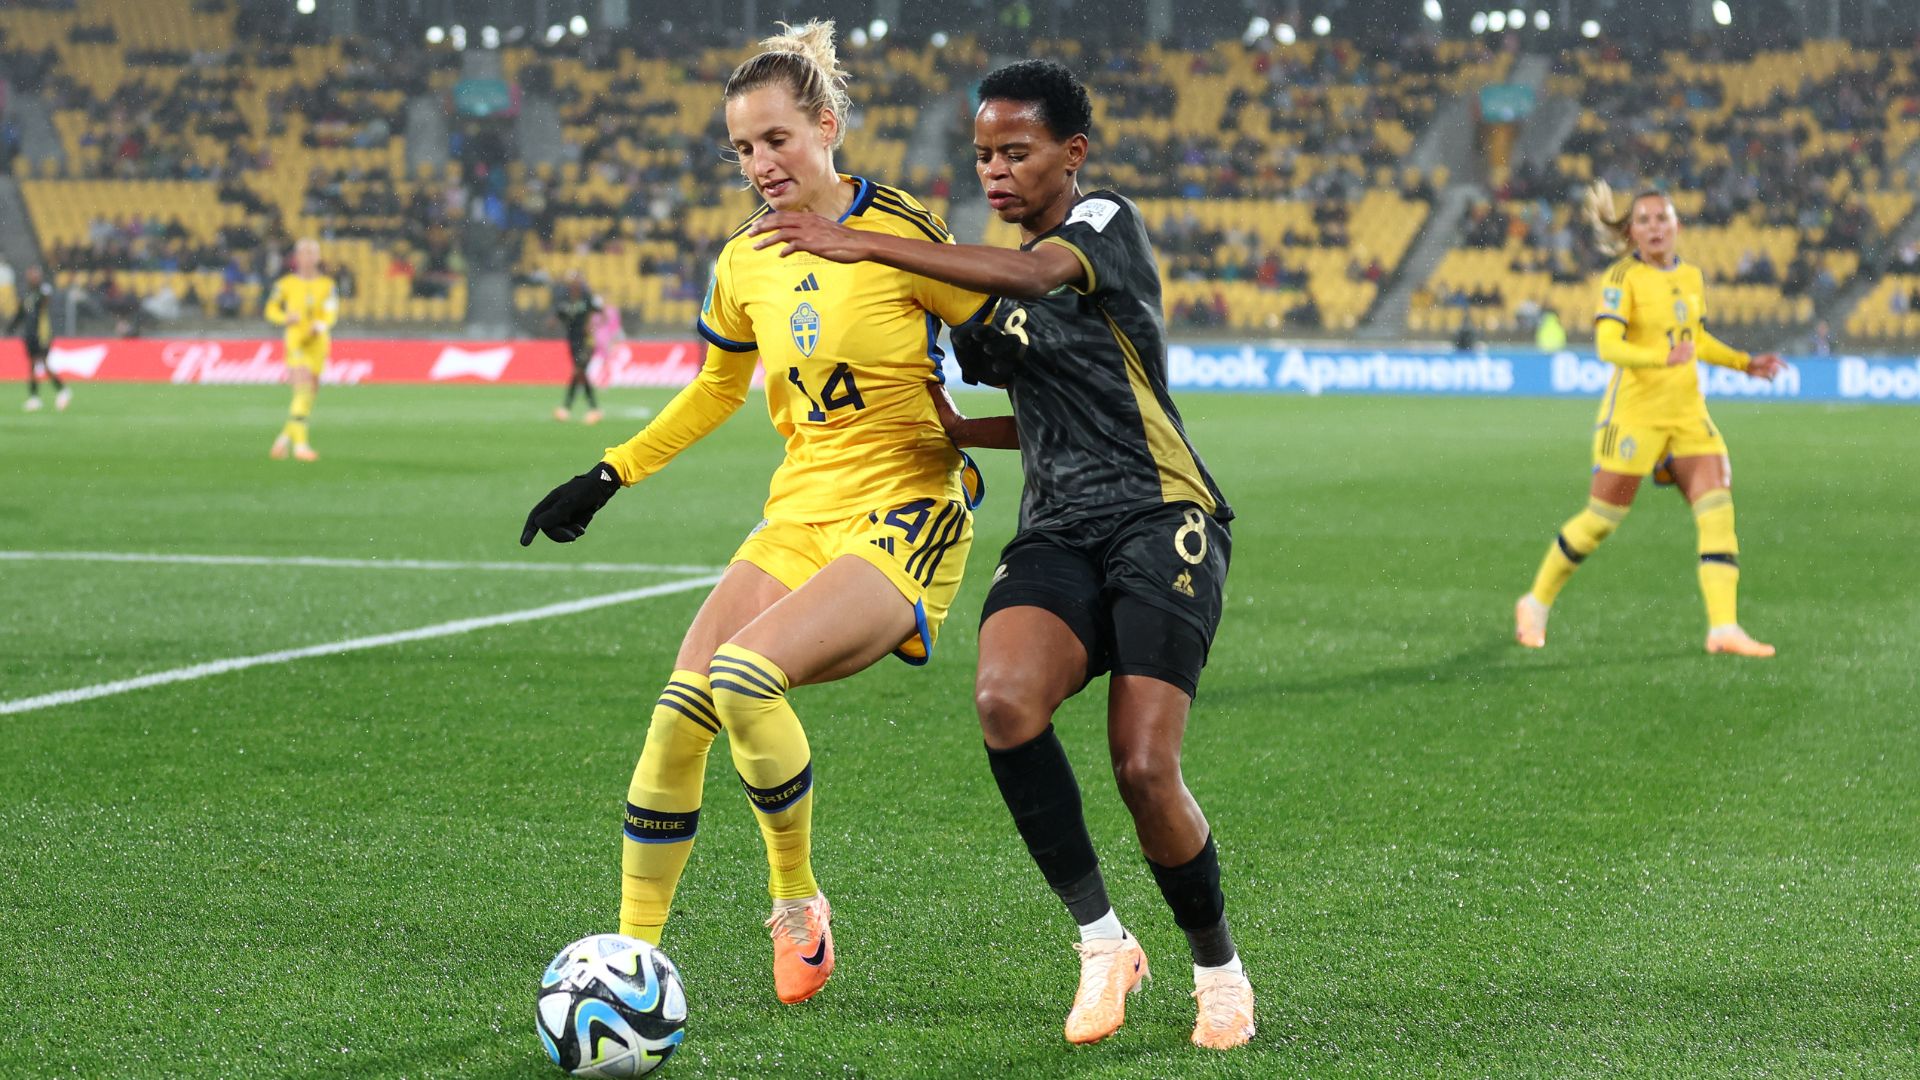 Sweden and South Africa faced off at the Women's World Cup